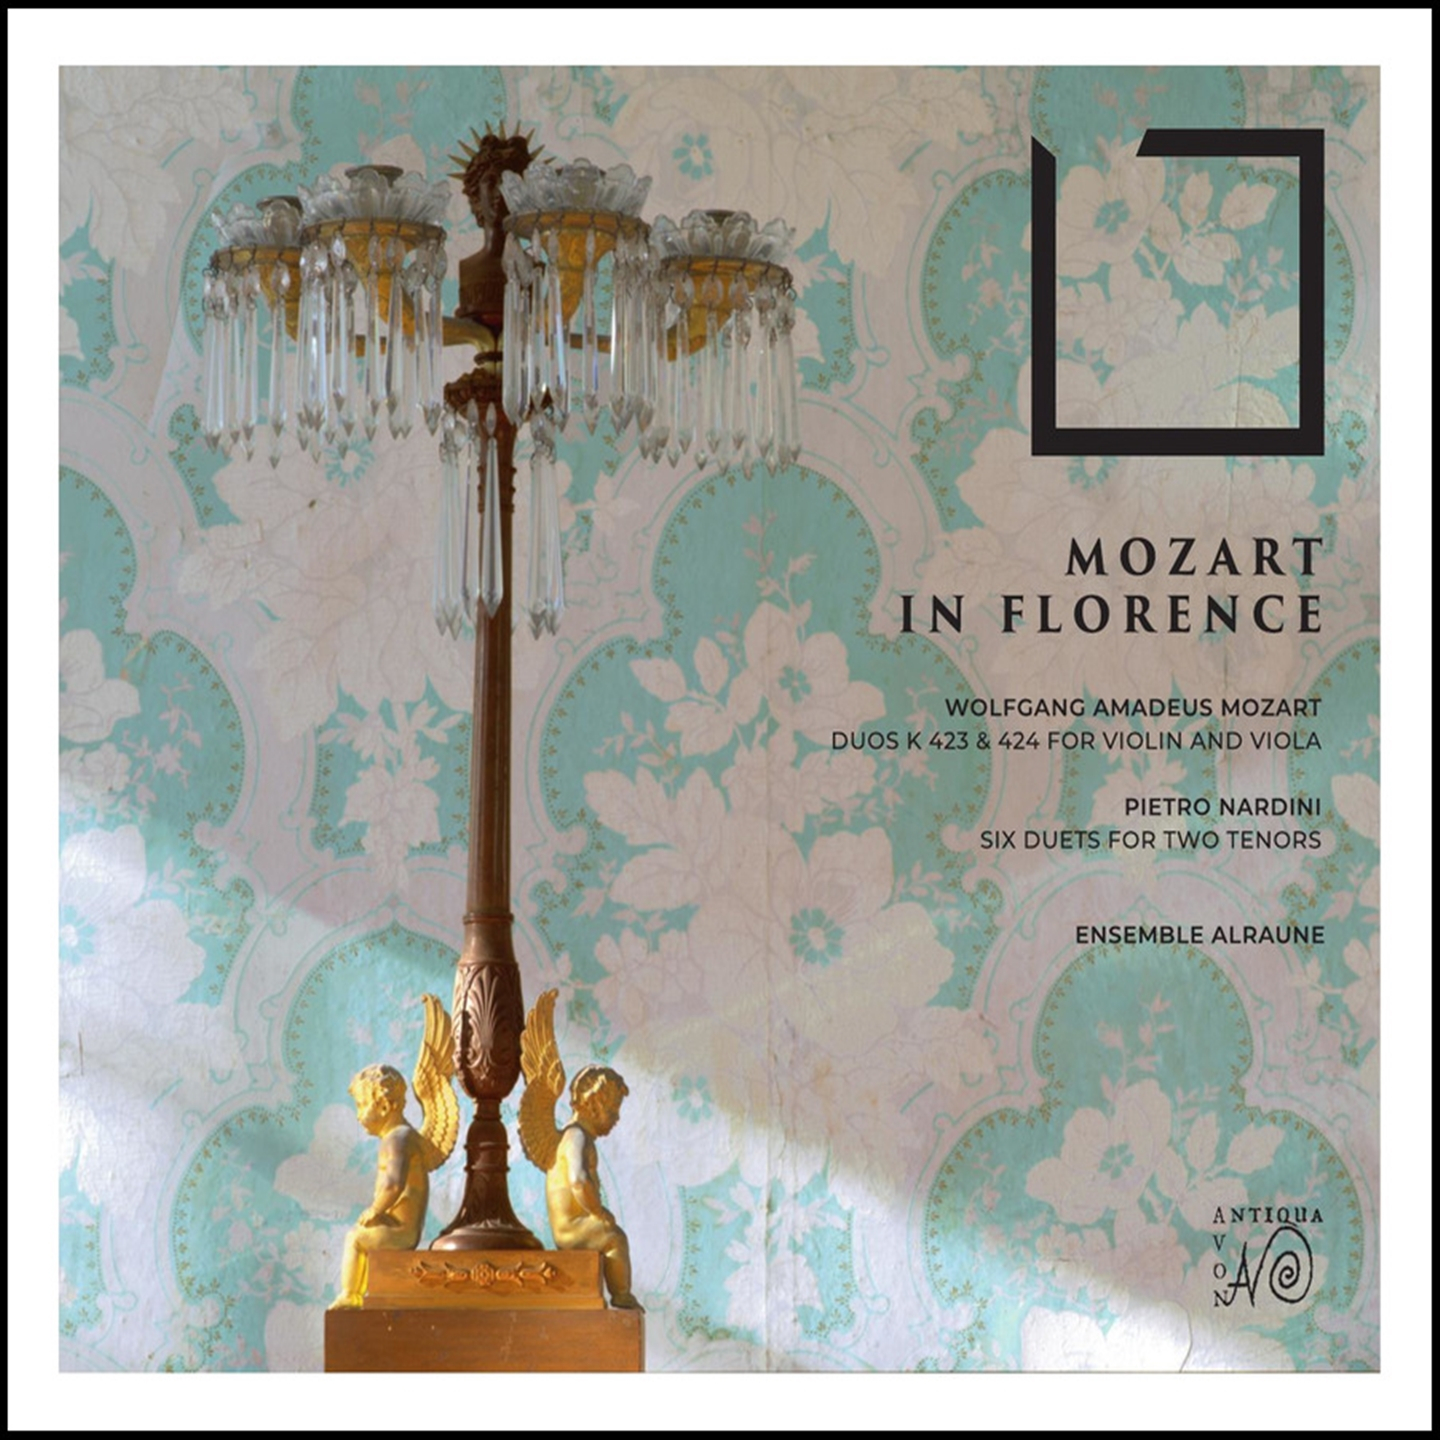 MOZART IN FLORENCE